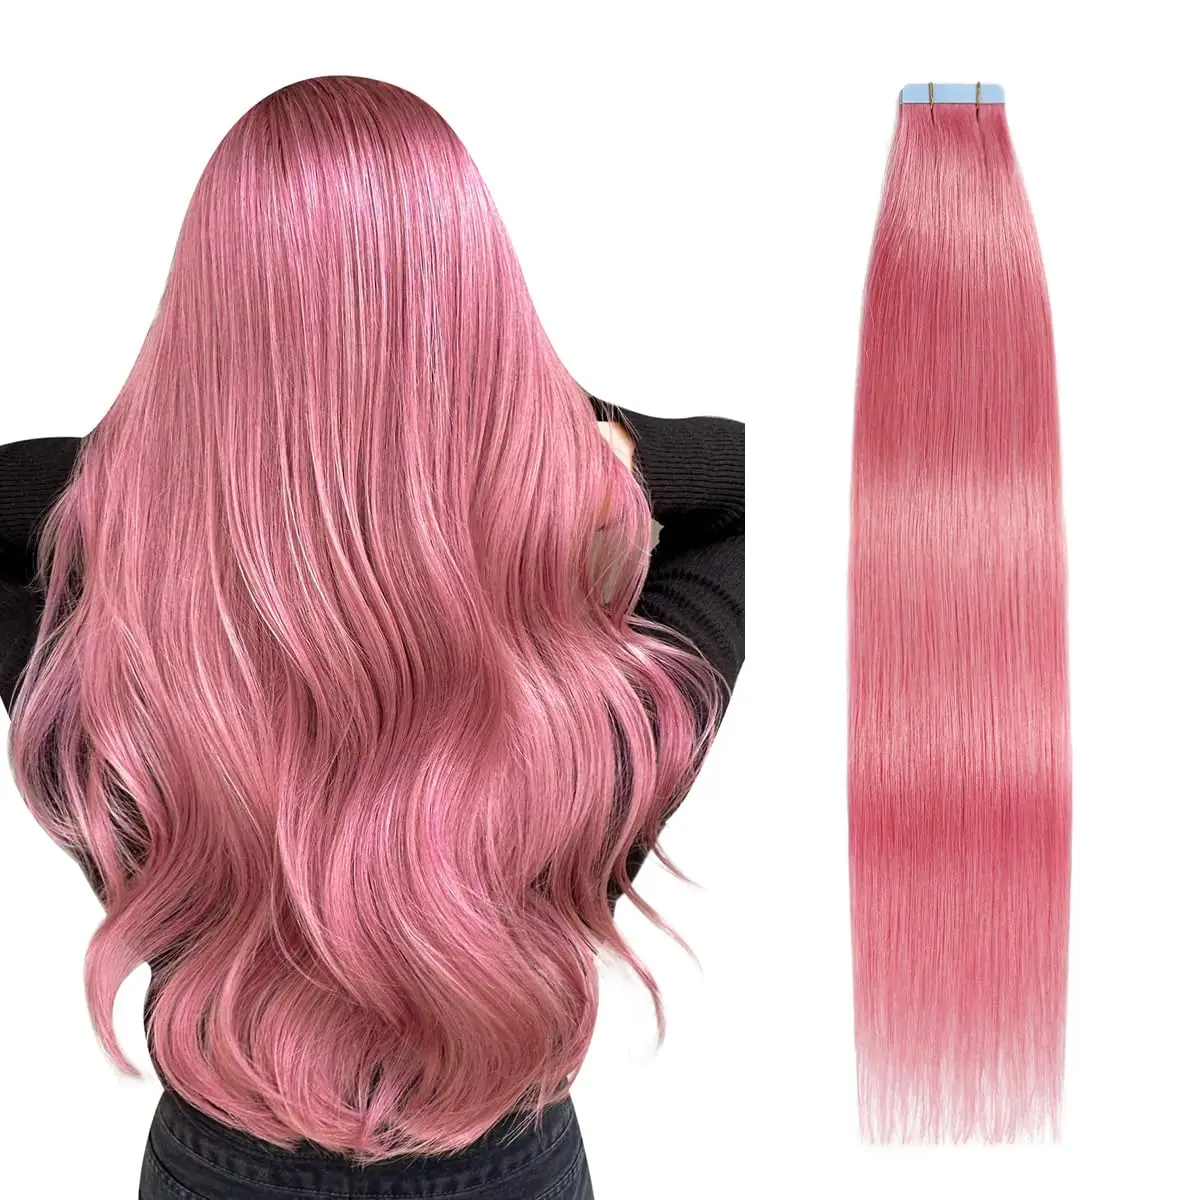 tape-in-hair-extensions-human-hair-hot-pink-pu-tape-in-hair-extensions-30-inch-20pcs-pack-straight-tape-in-extensions-100g